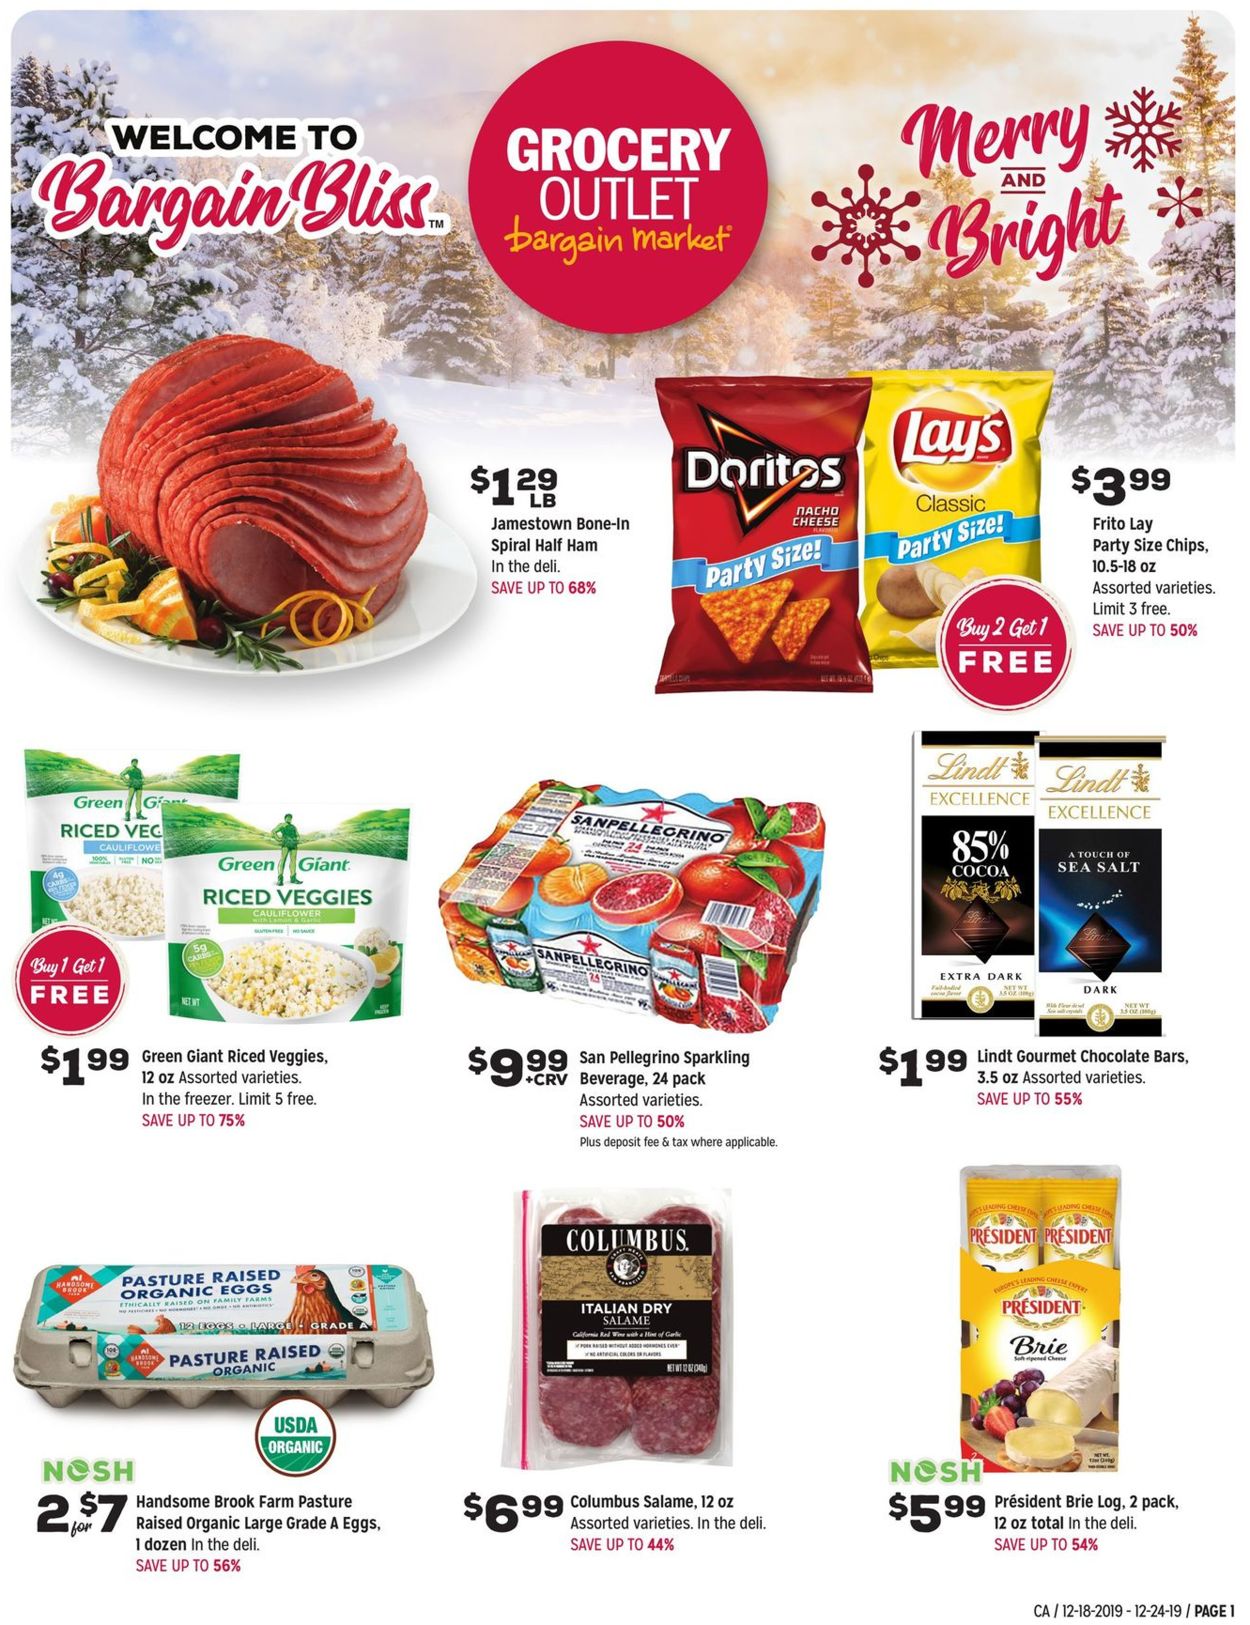 Grocery Outlet - Holiday Ad 2019 Current weekly ad 12/18 - 12/24/2019